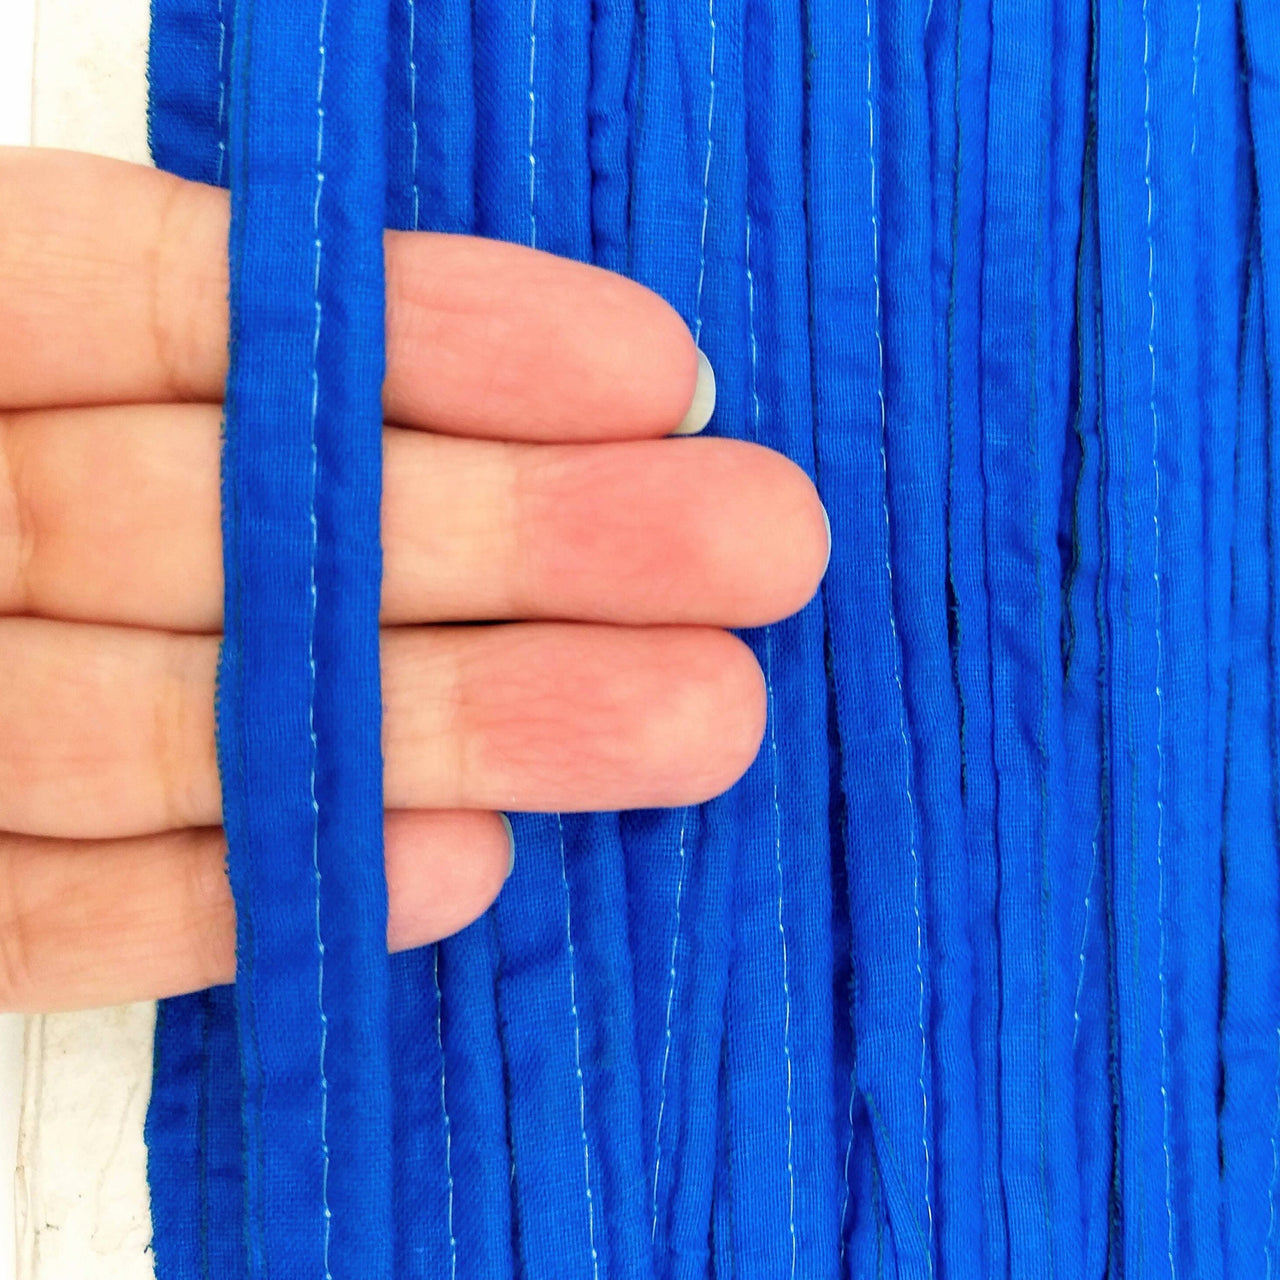 3 Yards, 5mm Flanged Insertion Piping on 10mm Band, Royal Blue Fabric Trim